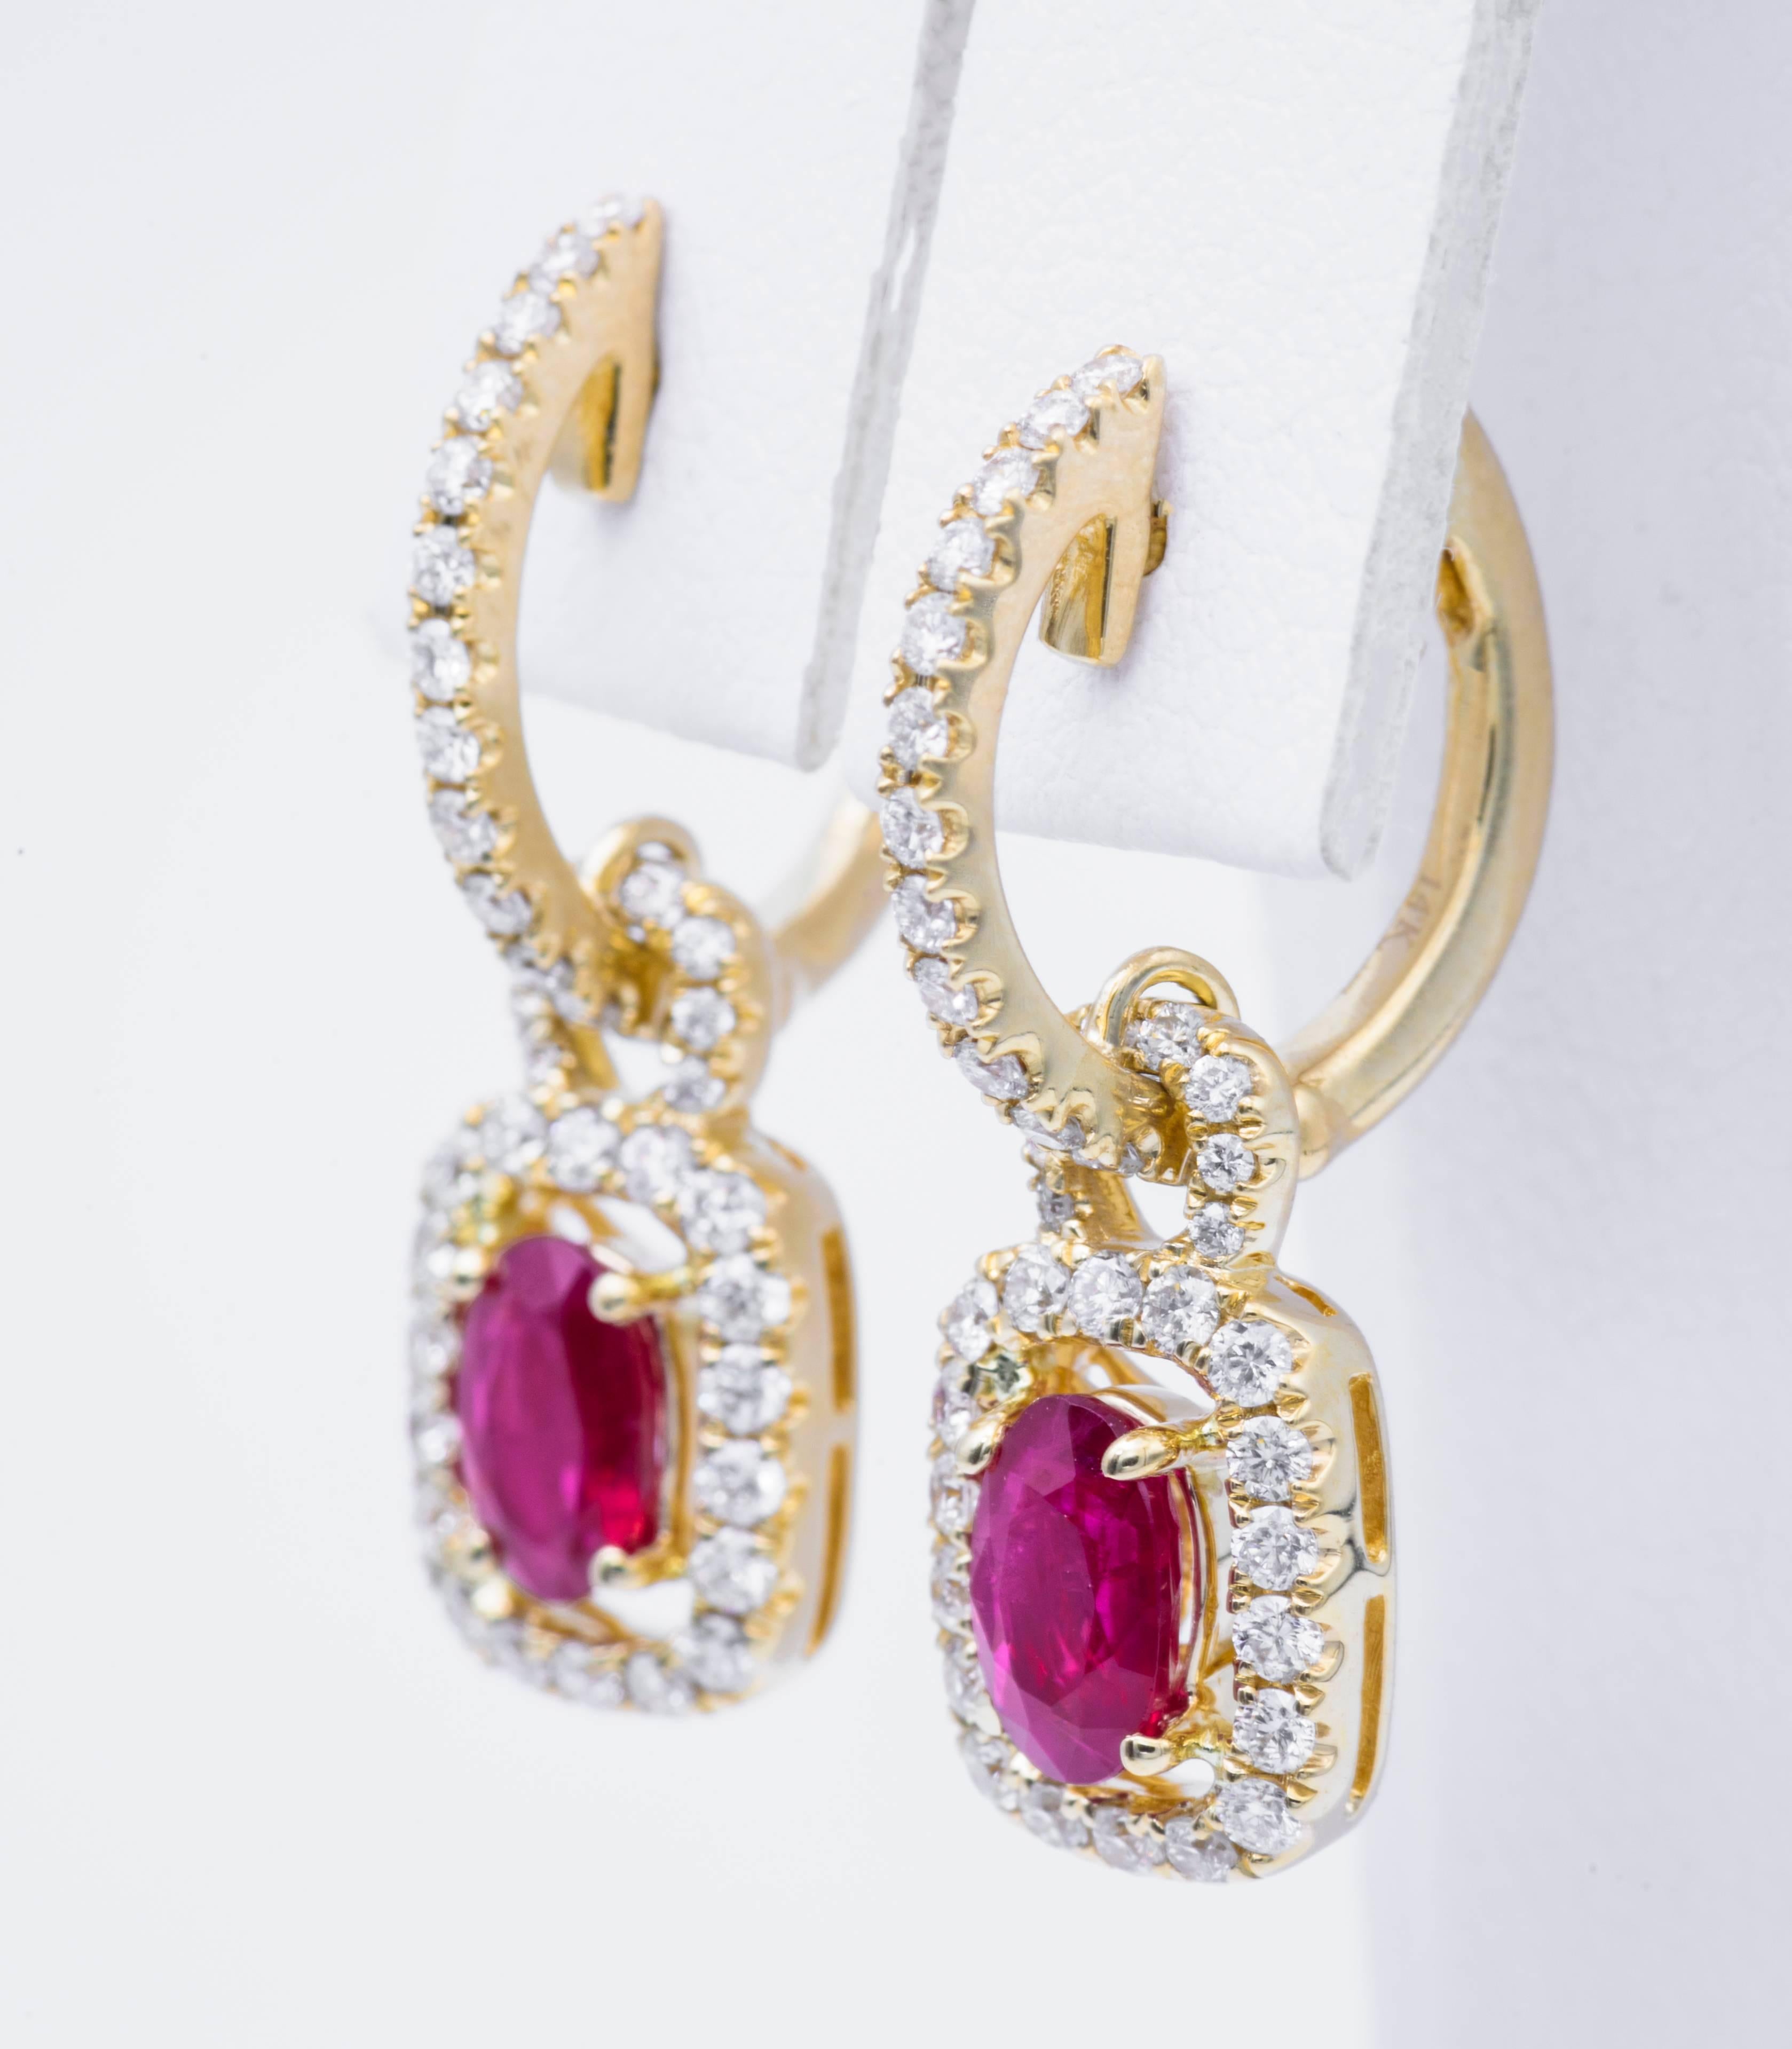 14 K Yellow Gold
6x4 mm Burmese ruby 1.10 Carats
Diamonds Weight: 0.66 Cts.
Dimensions of earrings: 23 x 8 mm